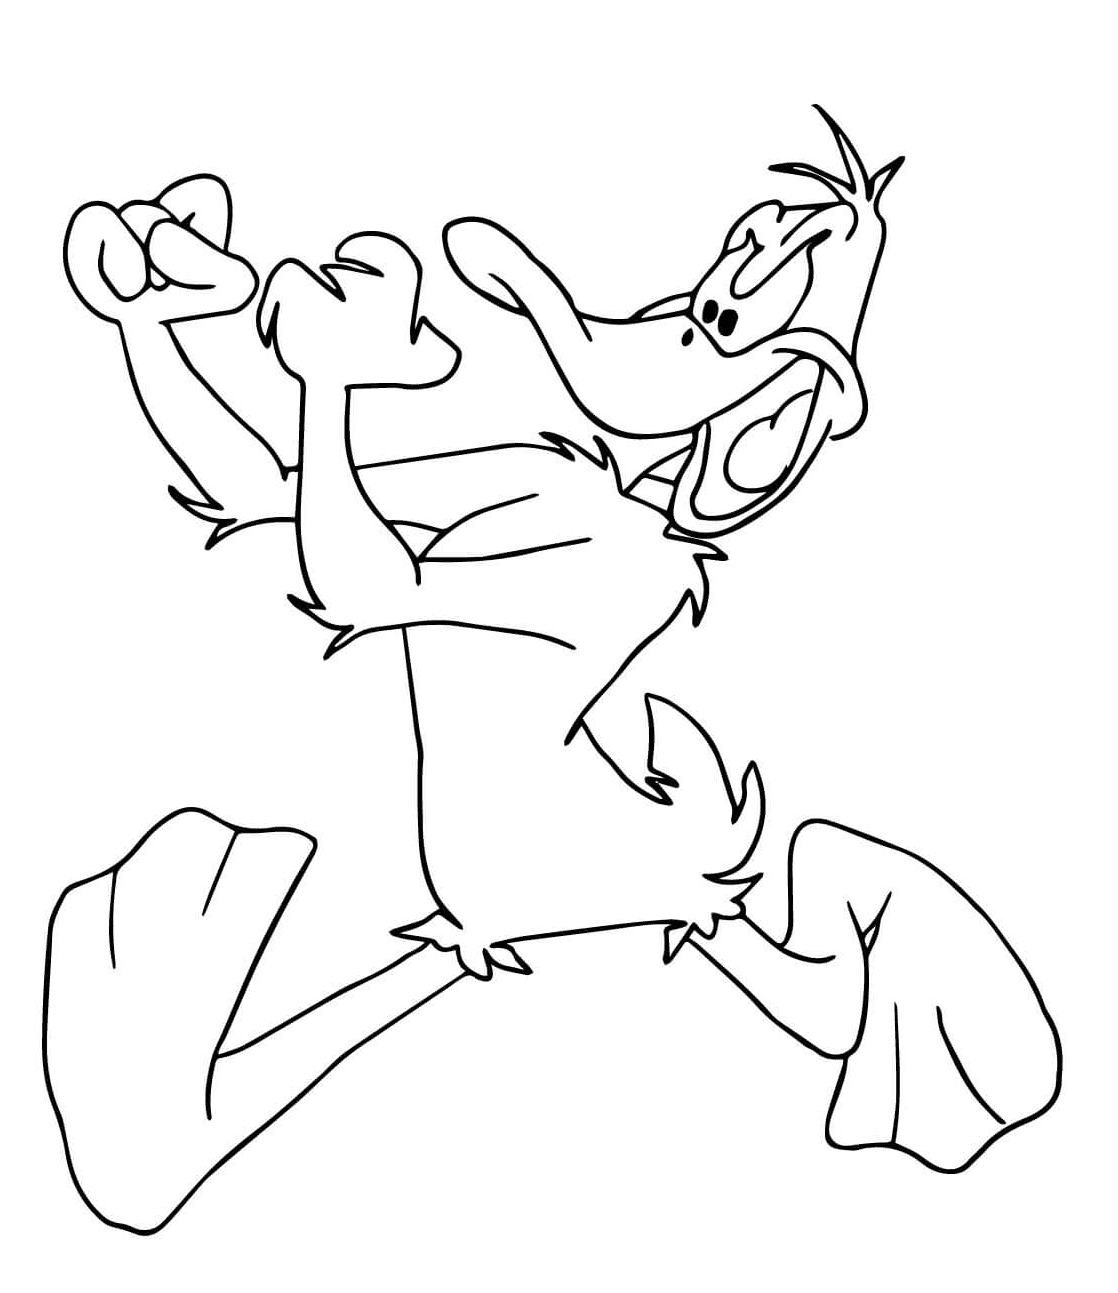 Daffy Duck Ready for a Fight Coloring Page